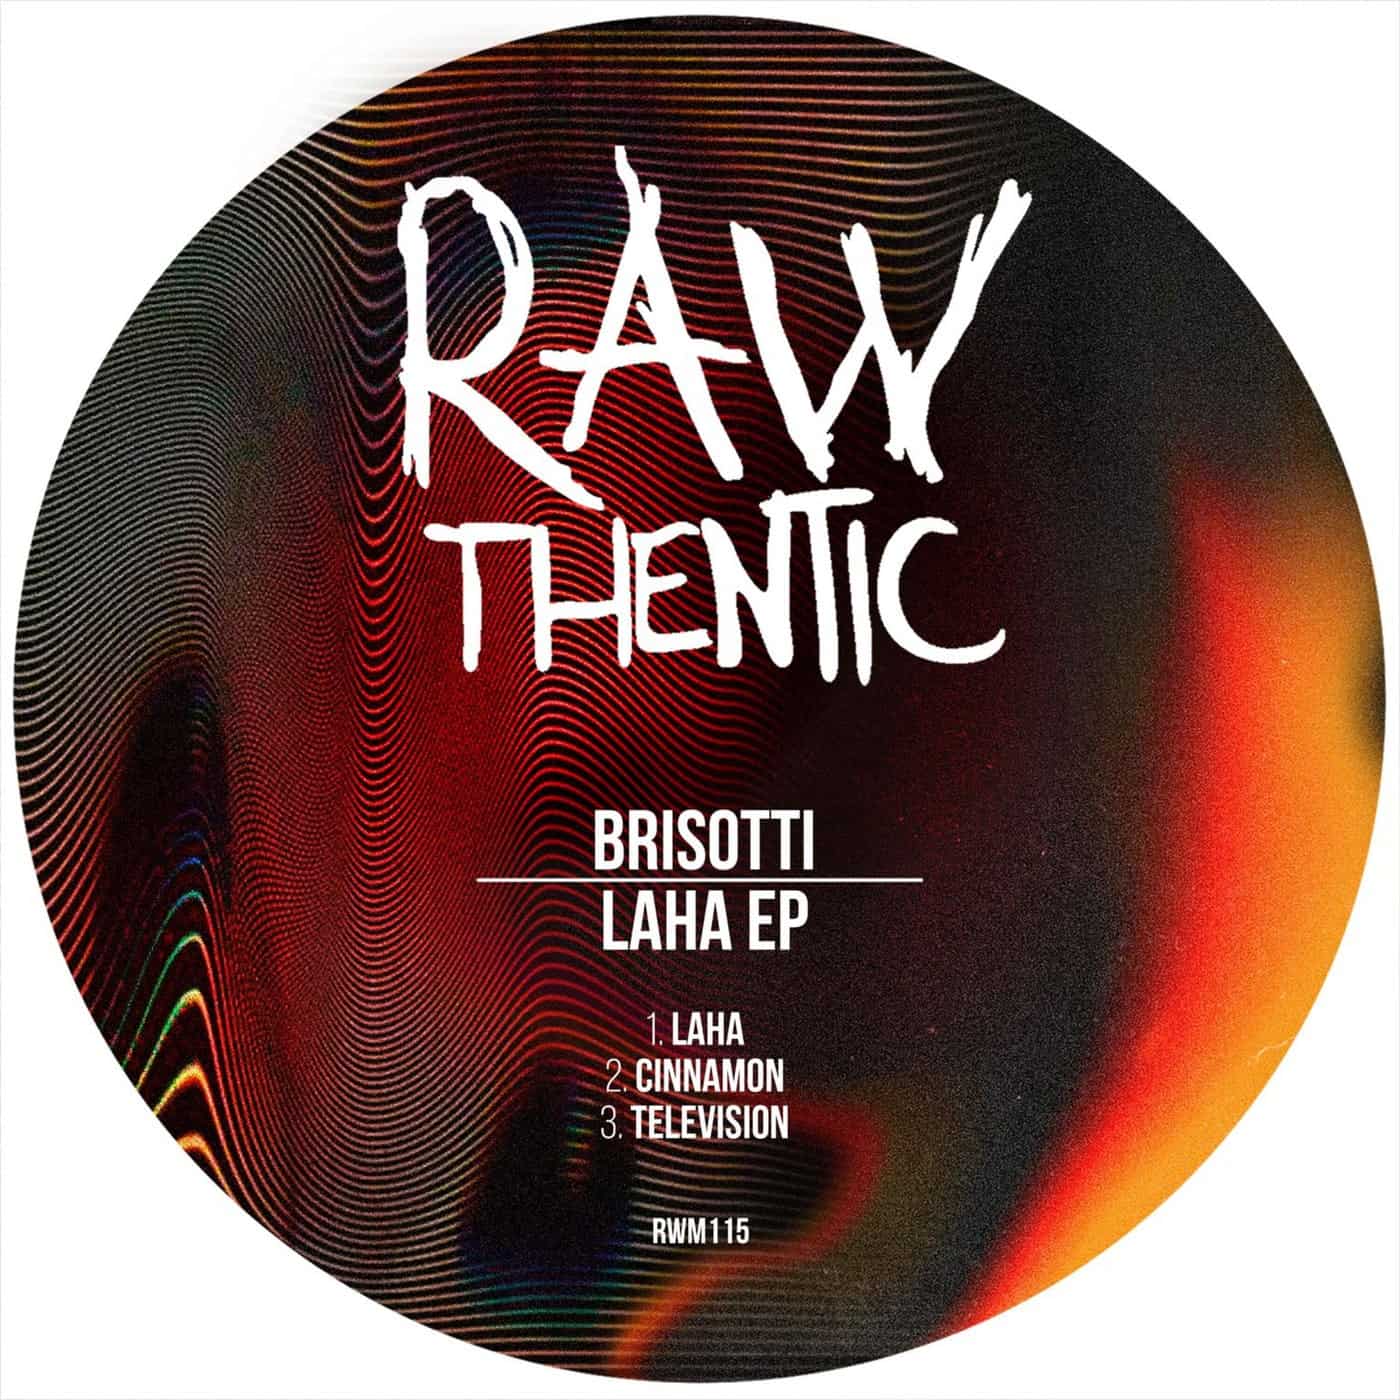 image cover: Laha EP by Brisotti on Rawthentic